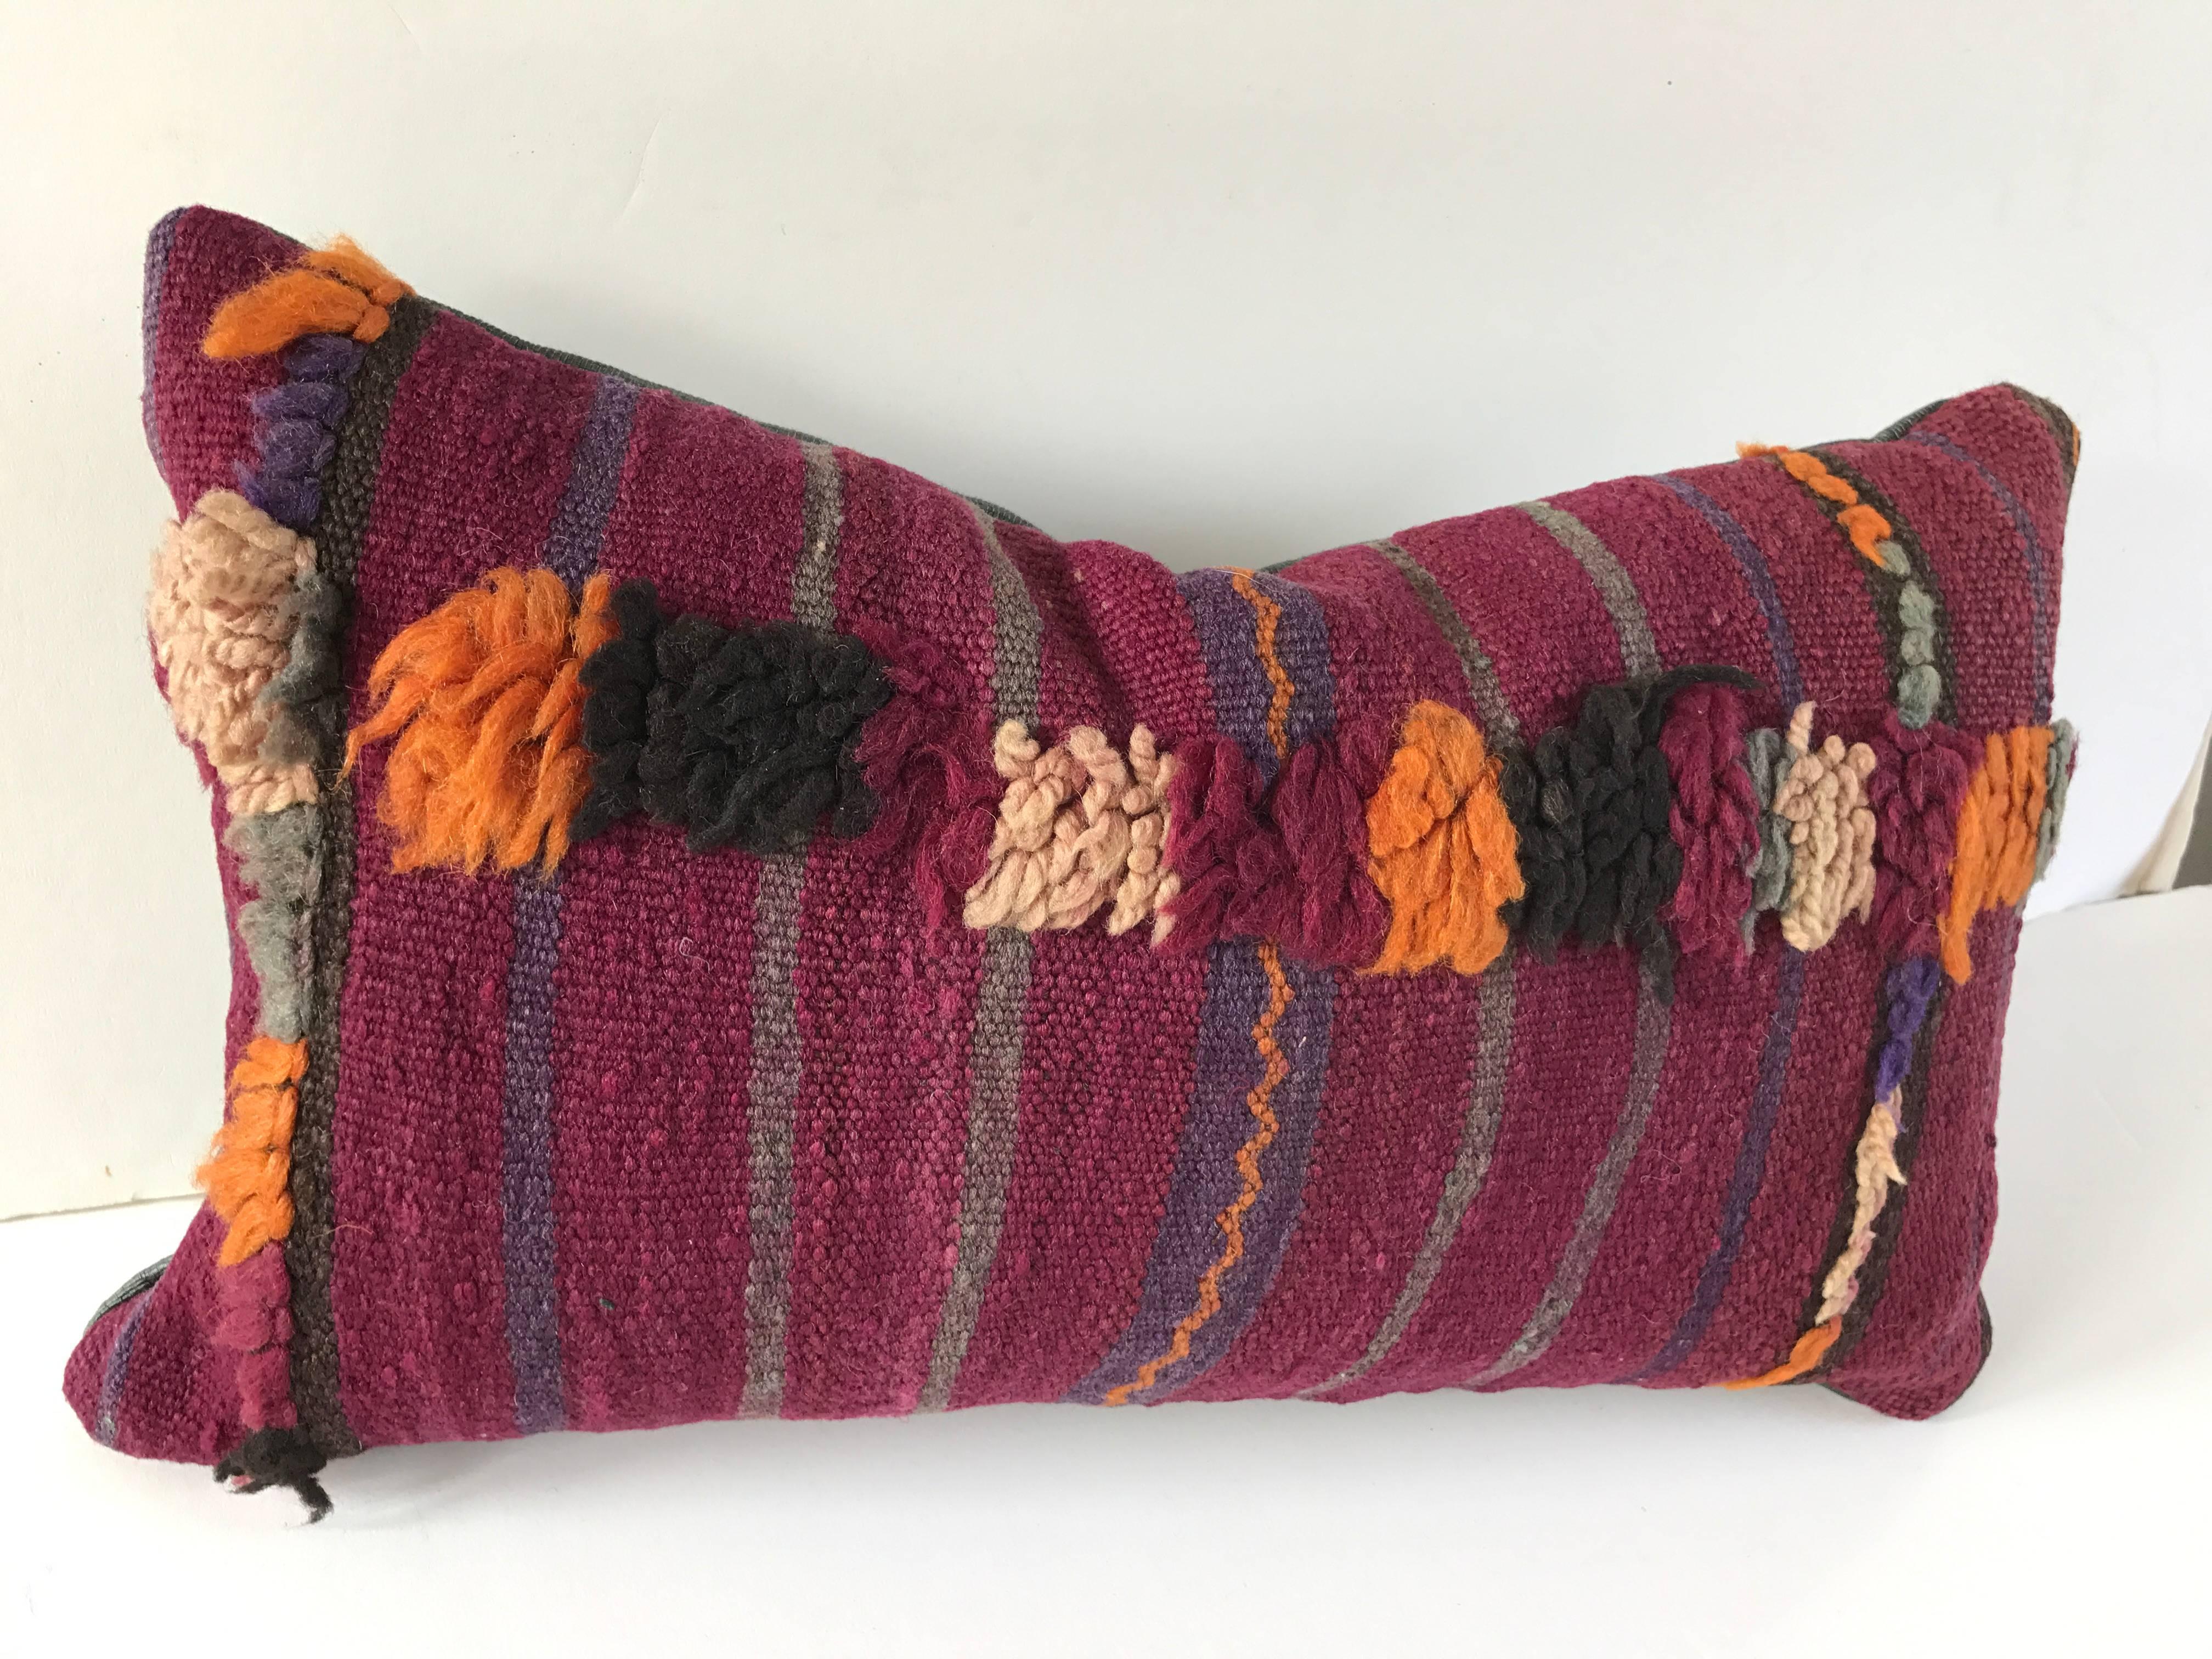 Custom pillow cut from a vintage hand loomed wool Moroccan Berber rug from the Atlas Mountains. Stripes are embellished with tufted wool designs. Pillow is backed in a teal silk/linen textile, filled with an insert of 50/50 down and feathers and